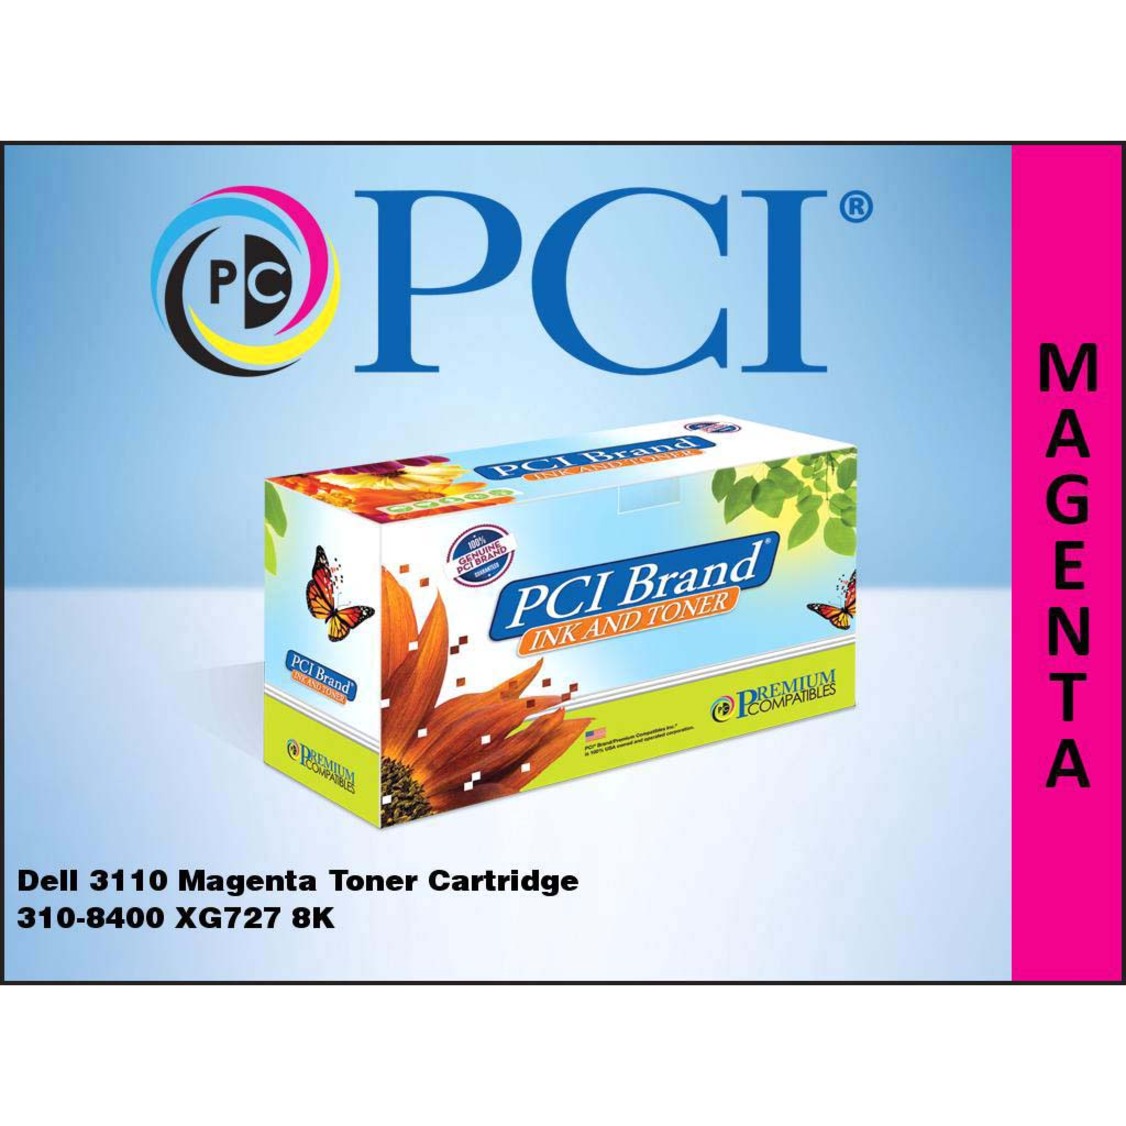 Premium Compatibles 310-8400PCI Dell 3110 Magenta Toner Ctg - High Yield Laser Toner Cartridge, 8000 Page Yield